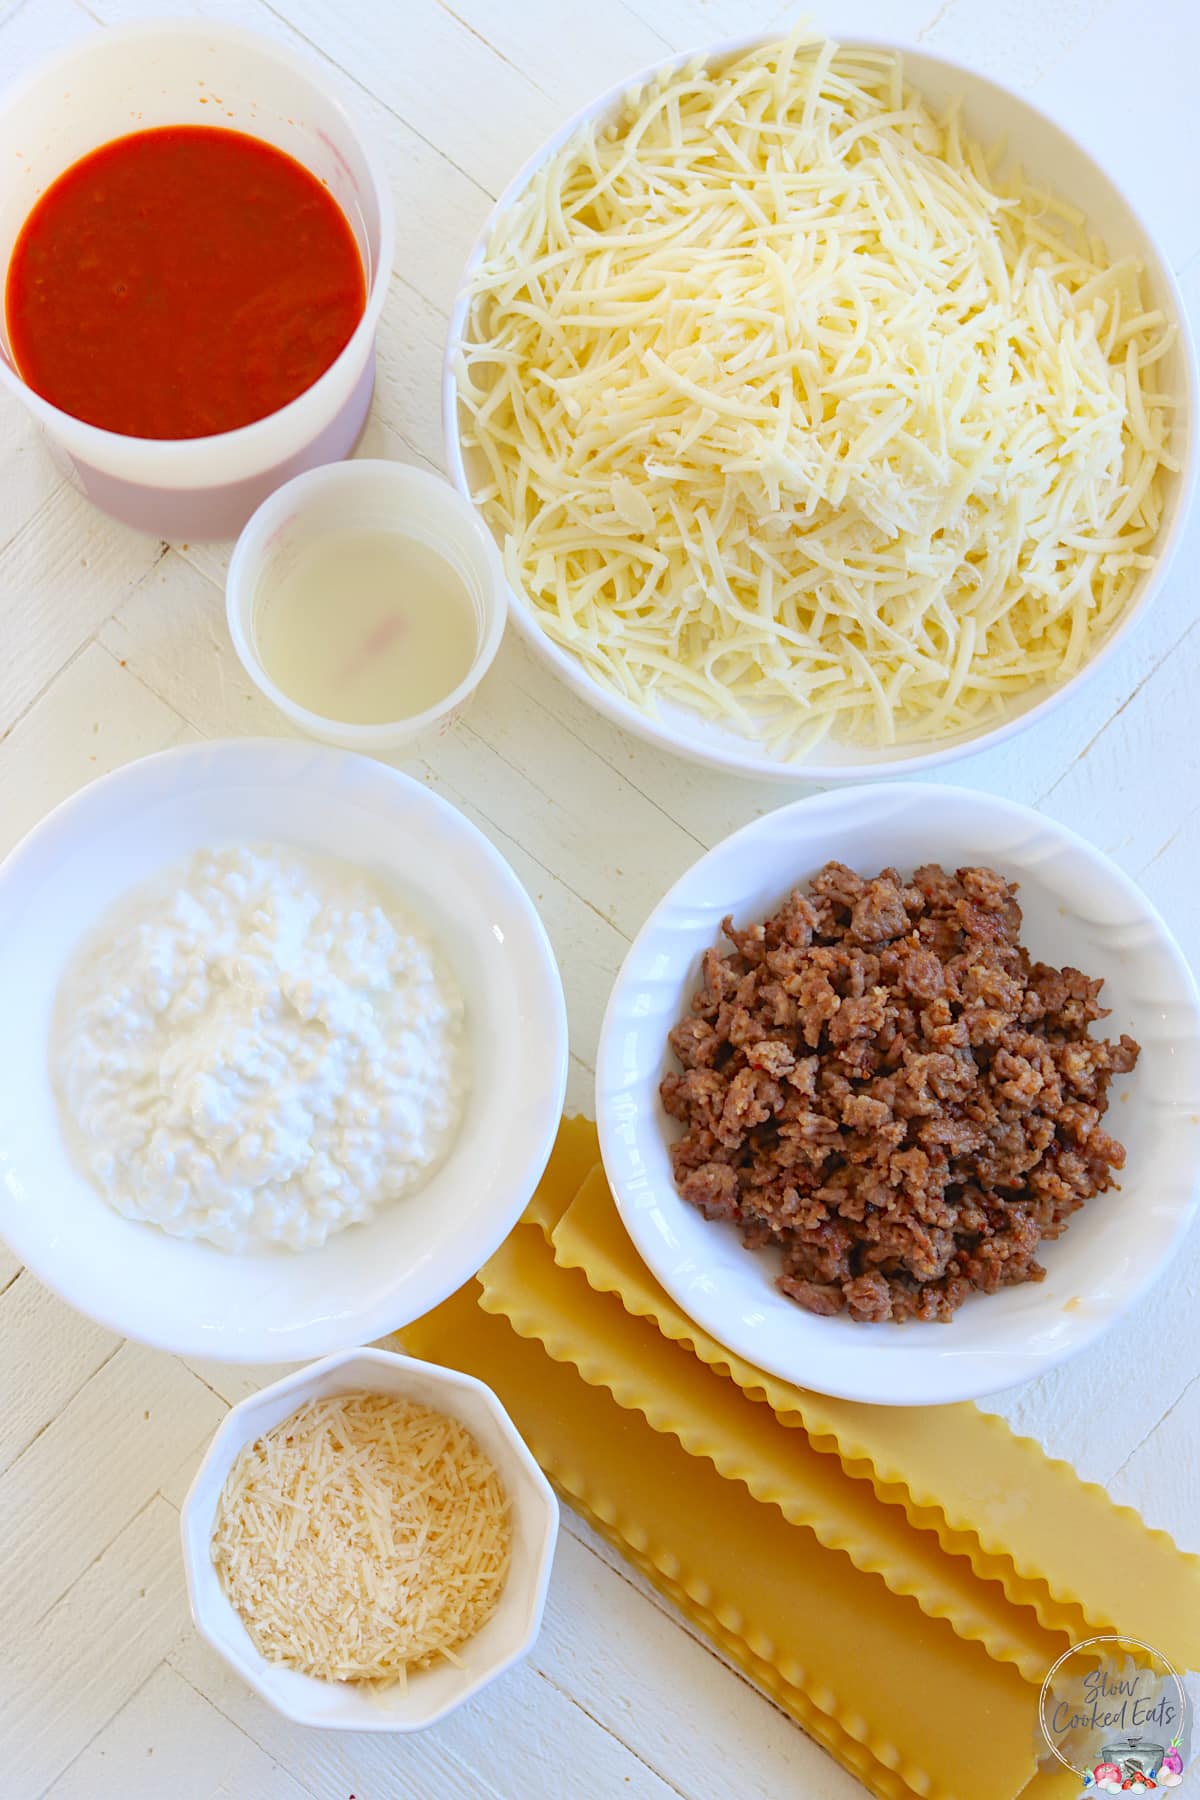 All the ingredients needed for making crockpot lasagna laying on a white wooden table.